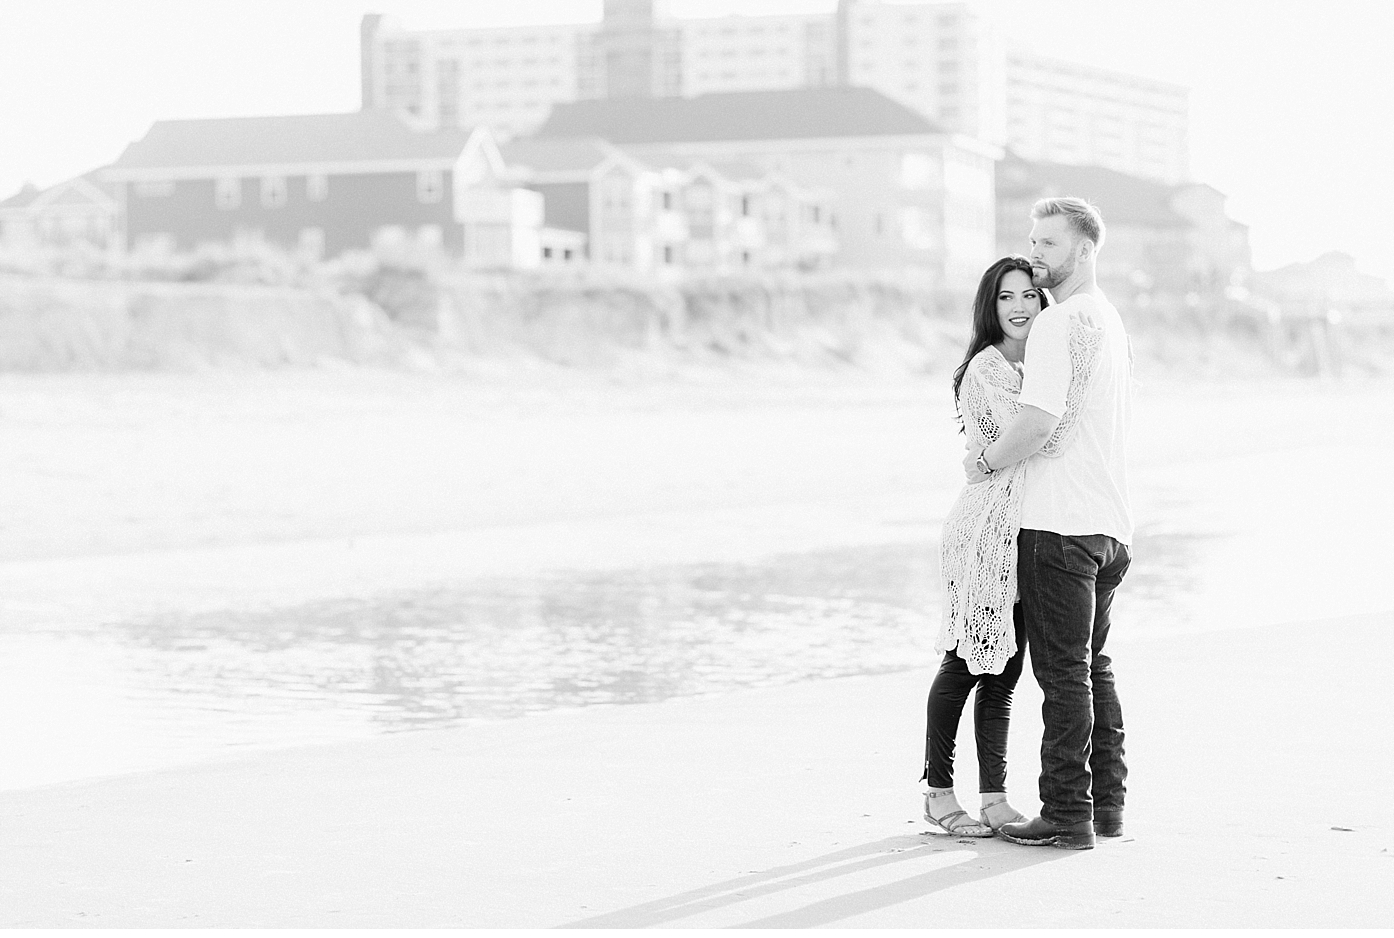 Sweetheart Portrait Session in Virginia Beach by Alisandra Photography